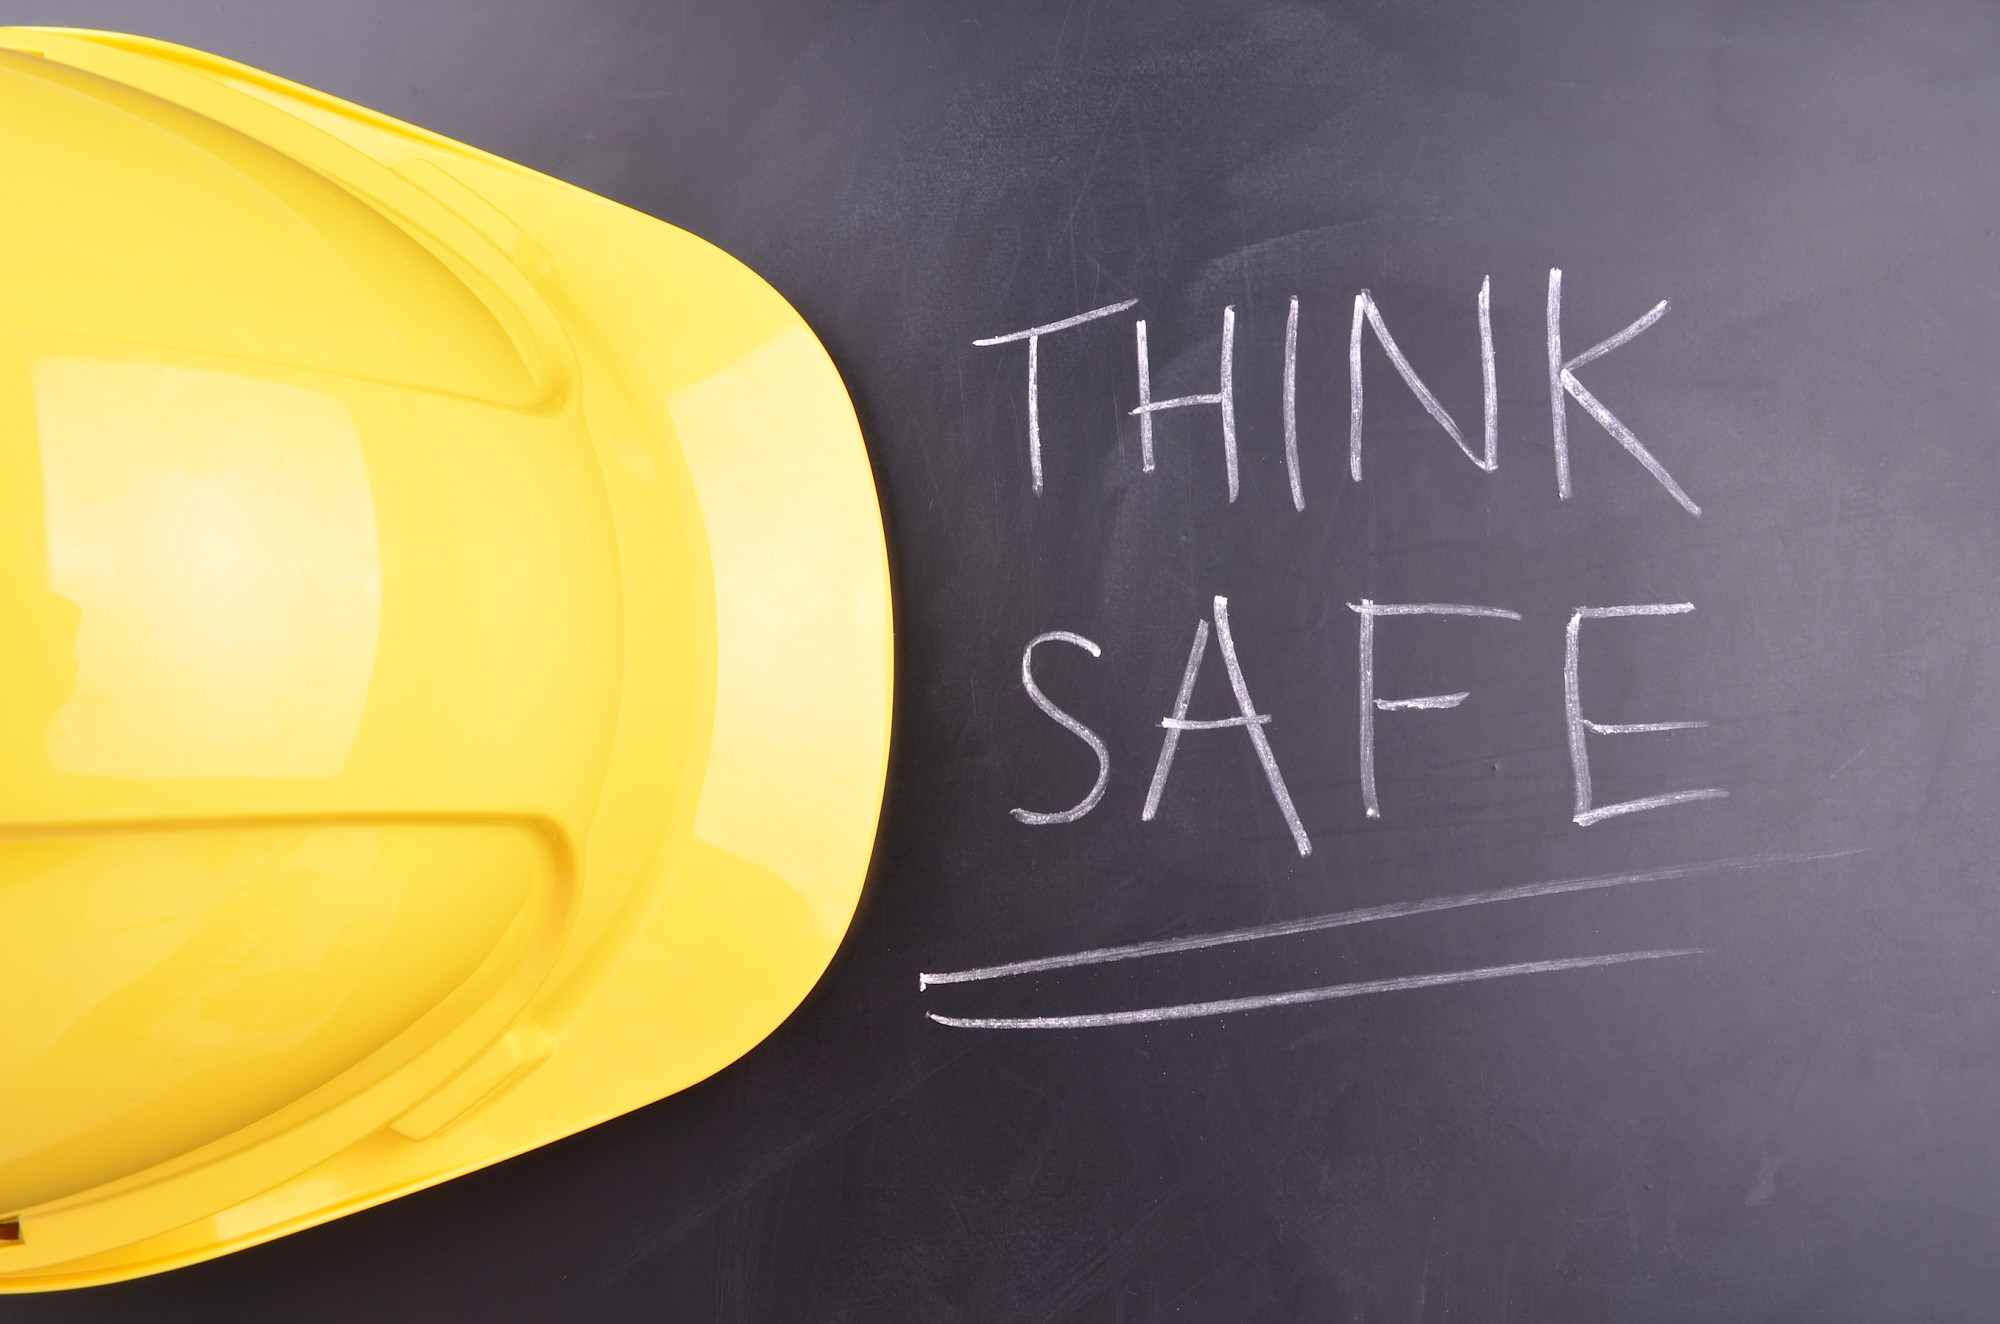 5 Practical Tips to Improve Safety at Your Workplace